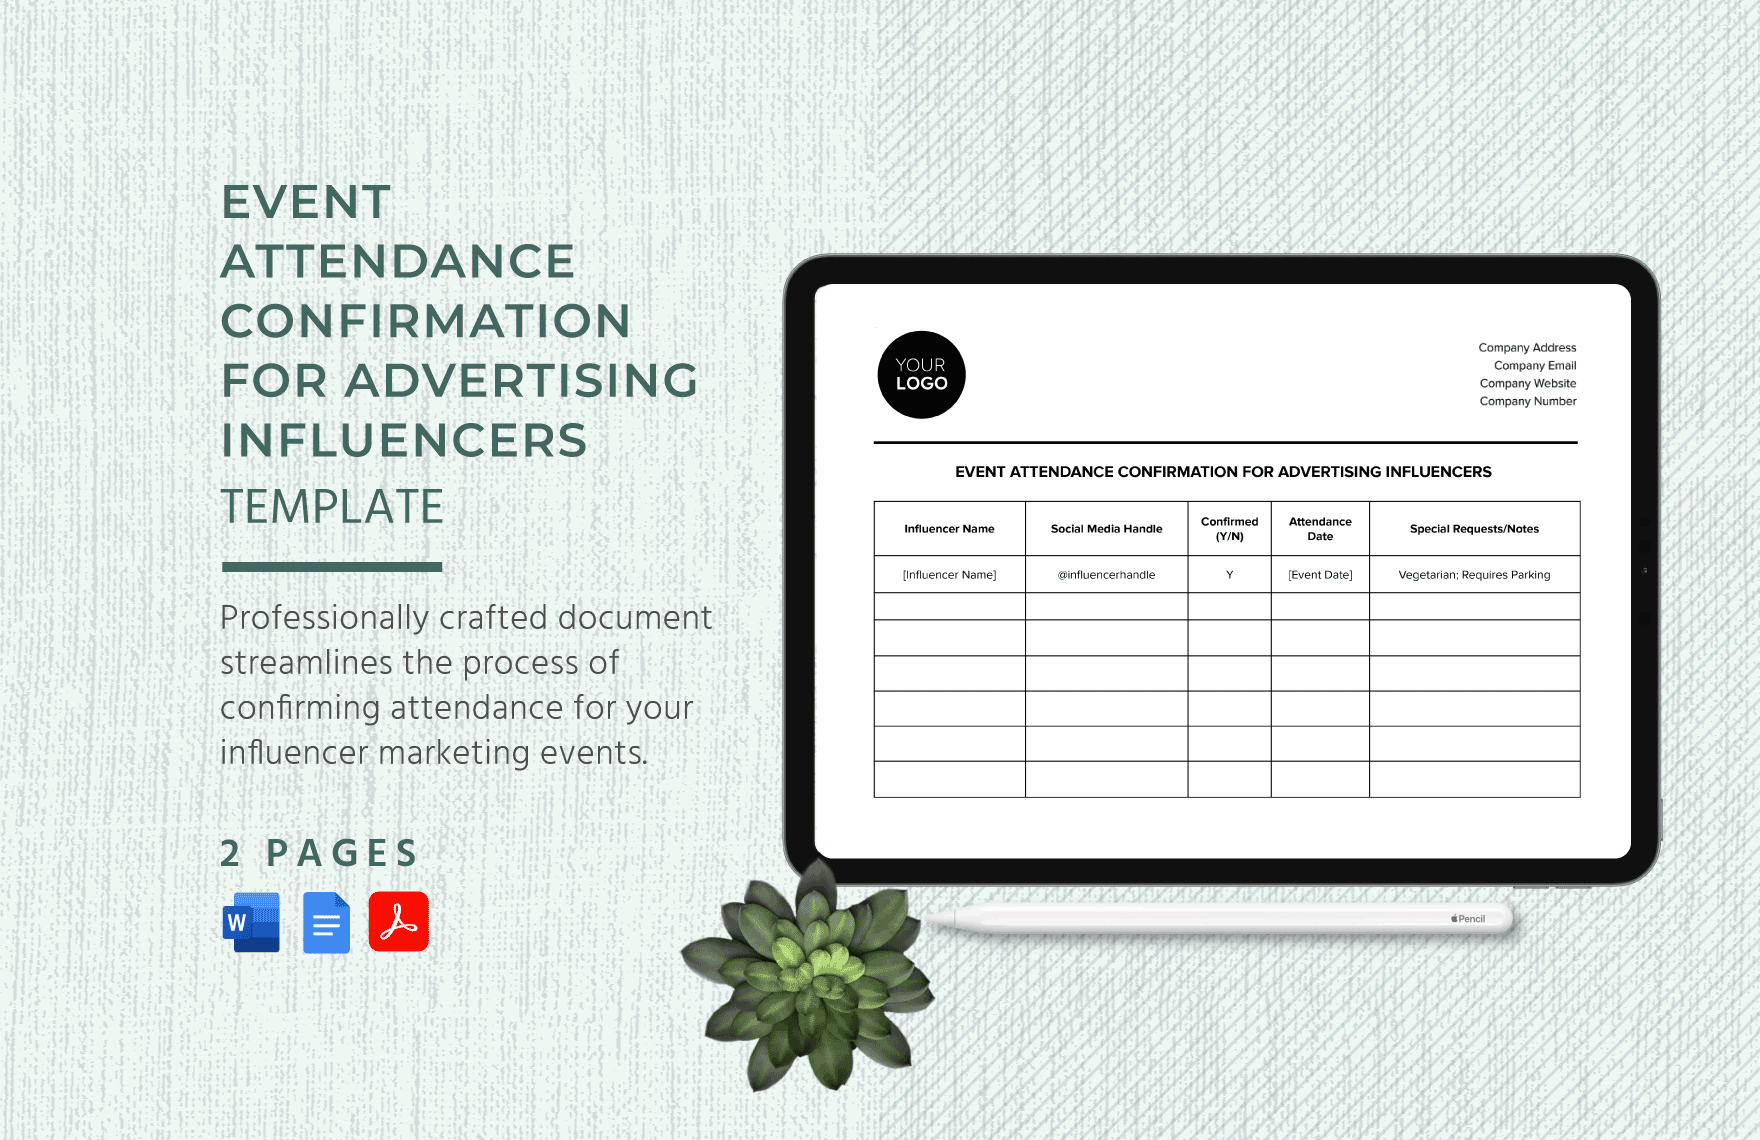 Event Attendance Confirmation for Advertising Influencers Template in Word, Google Docs, PDF